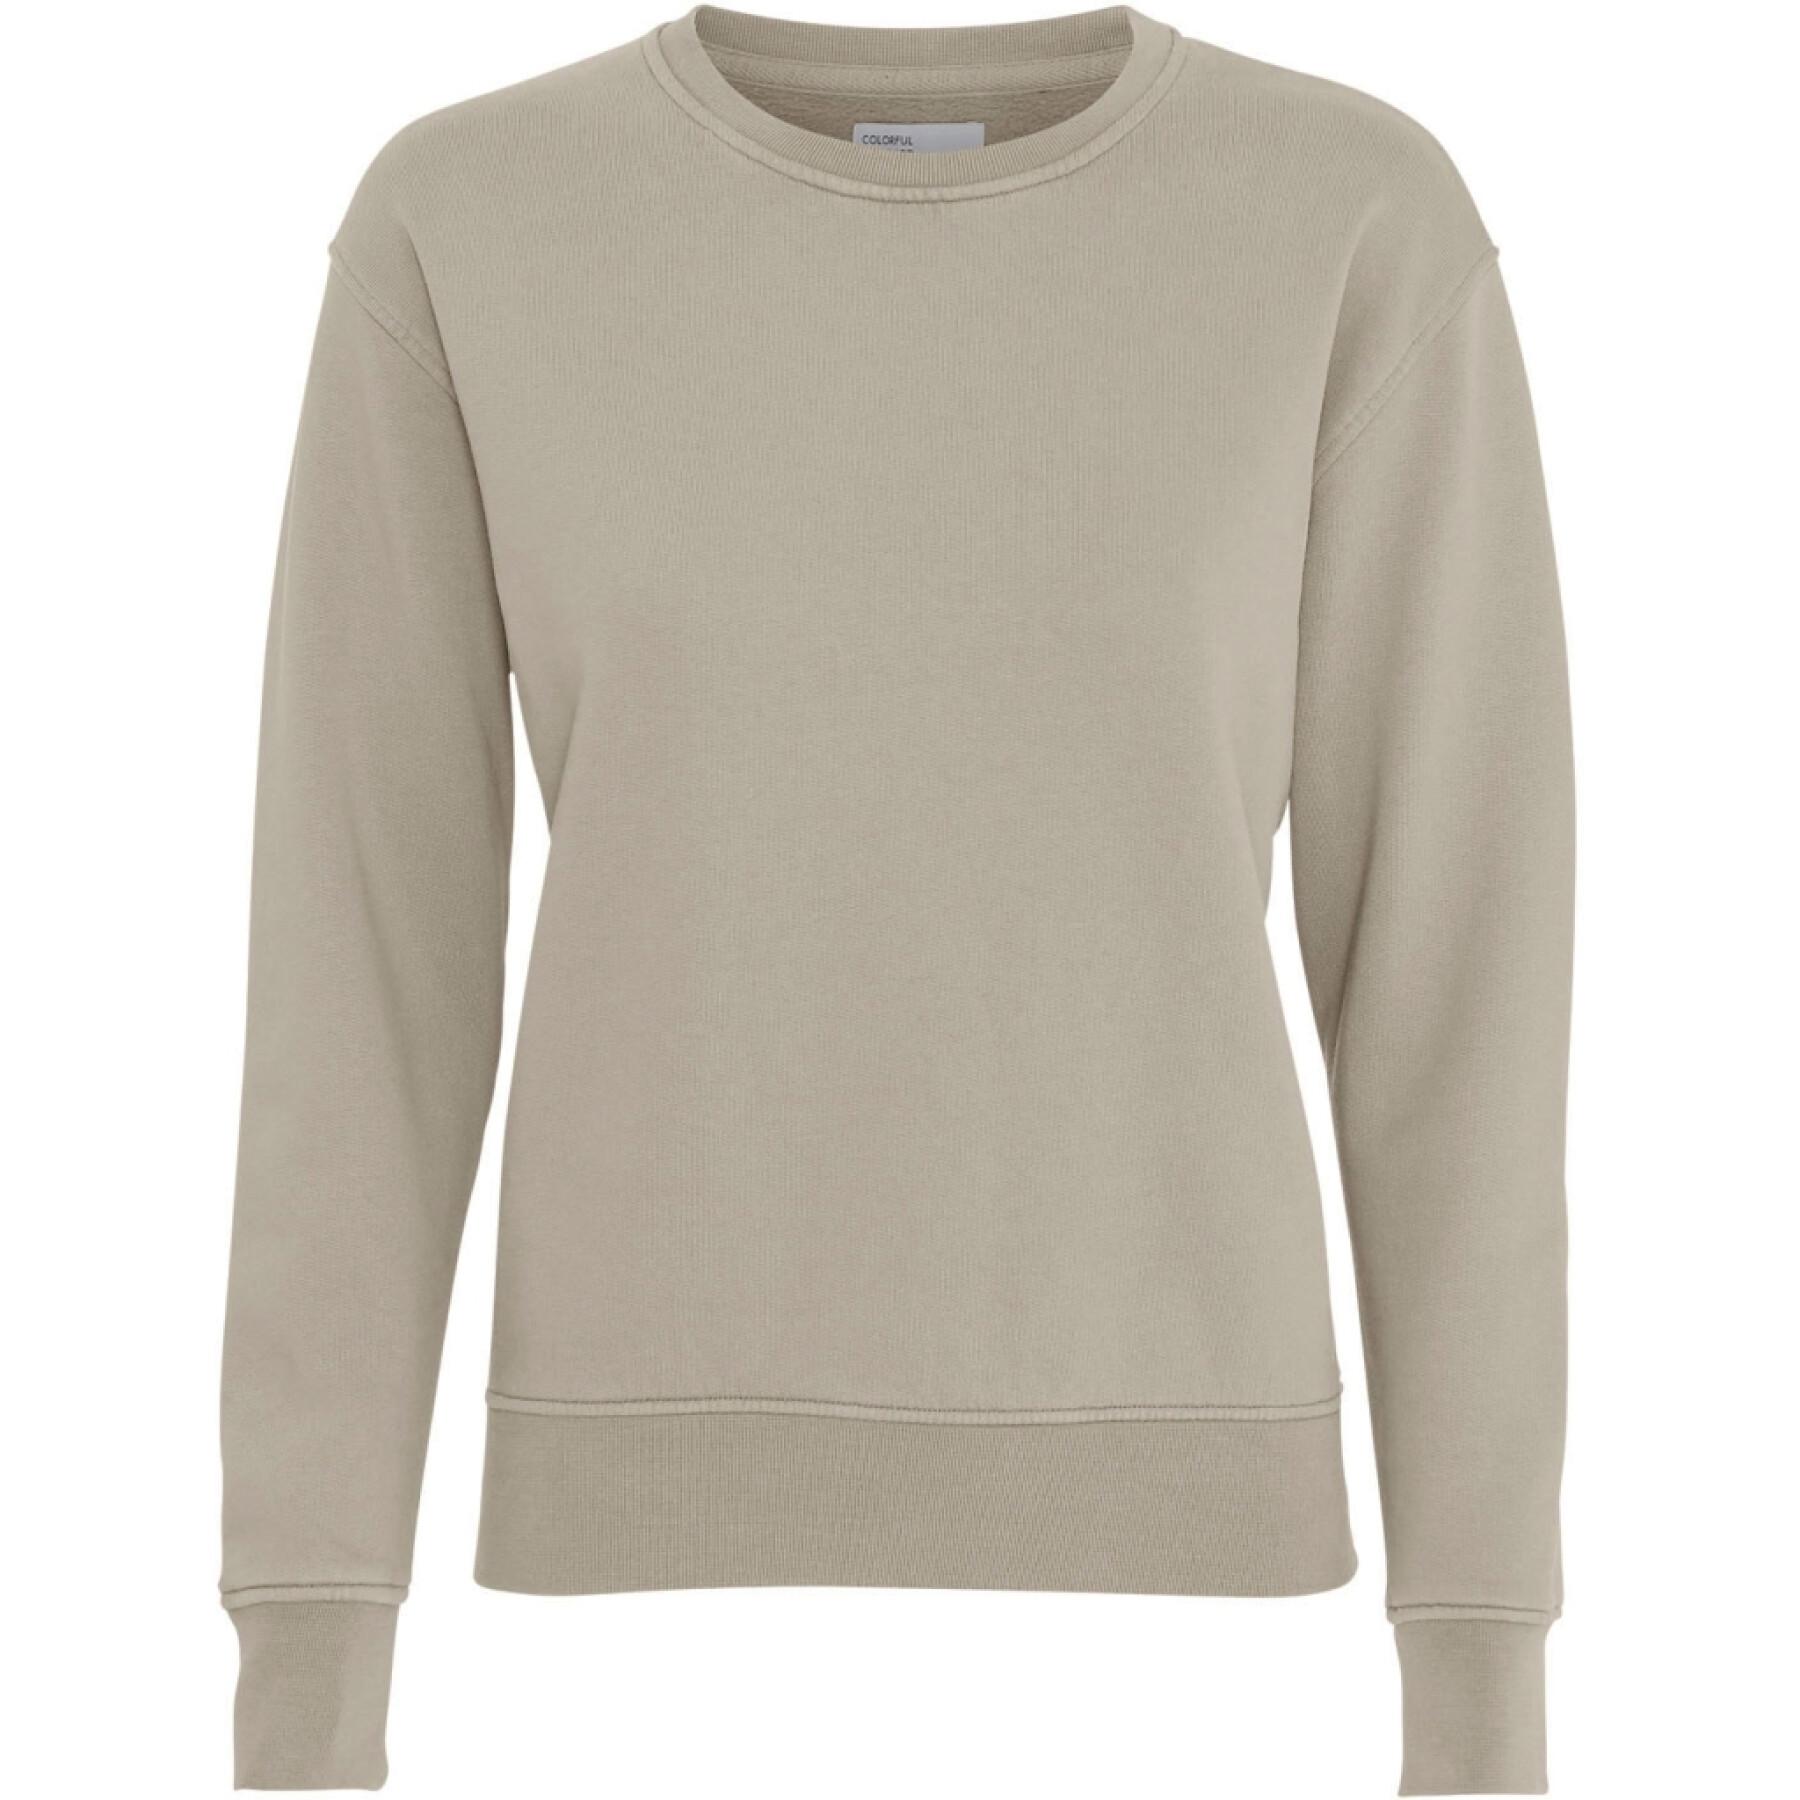 Women's round neck sweater Colorful Standard Classic Organic oyster grey